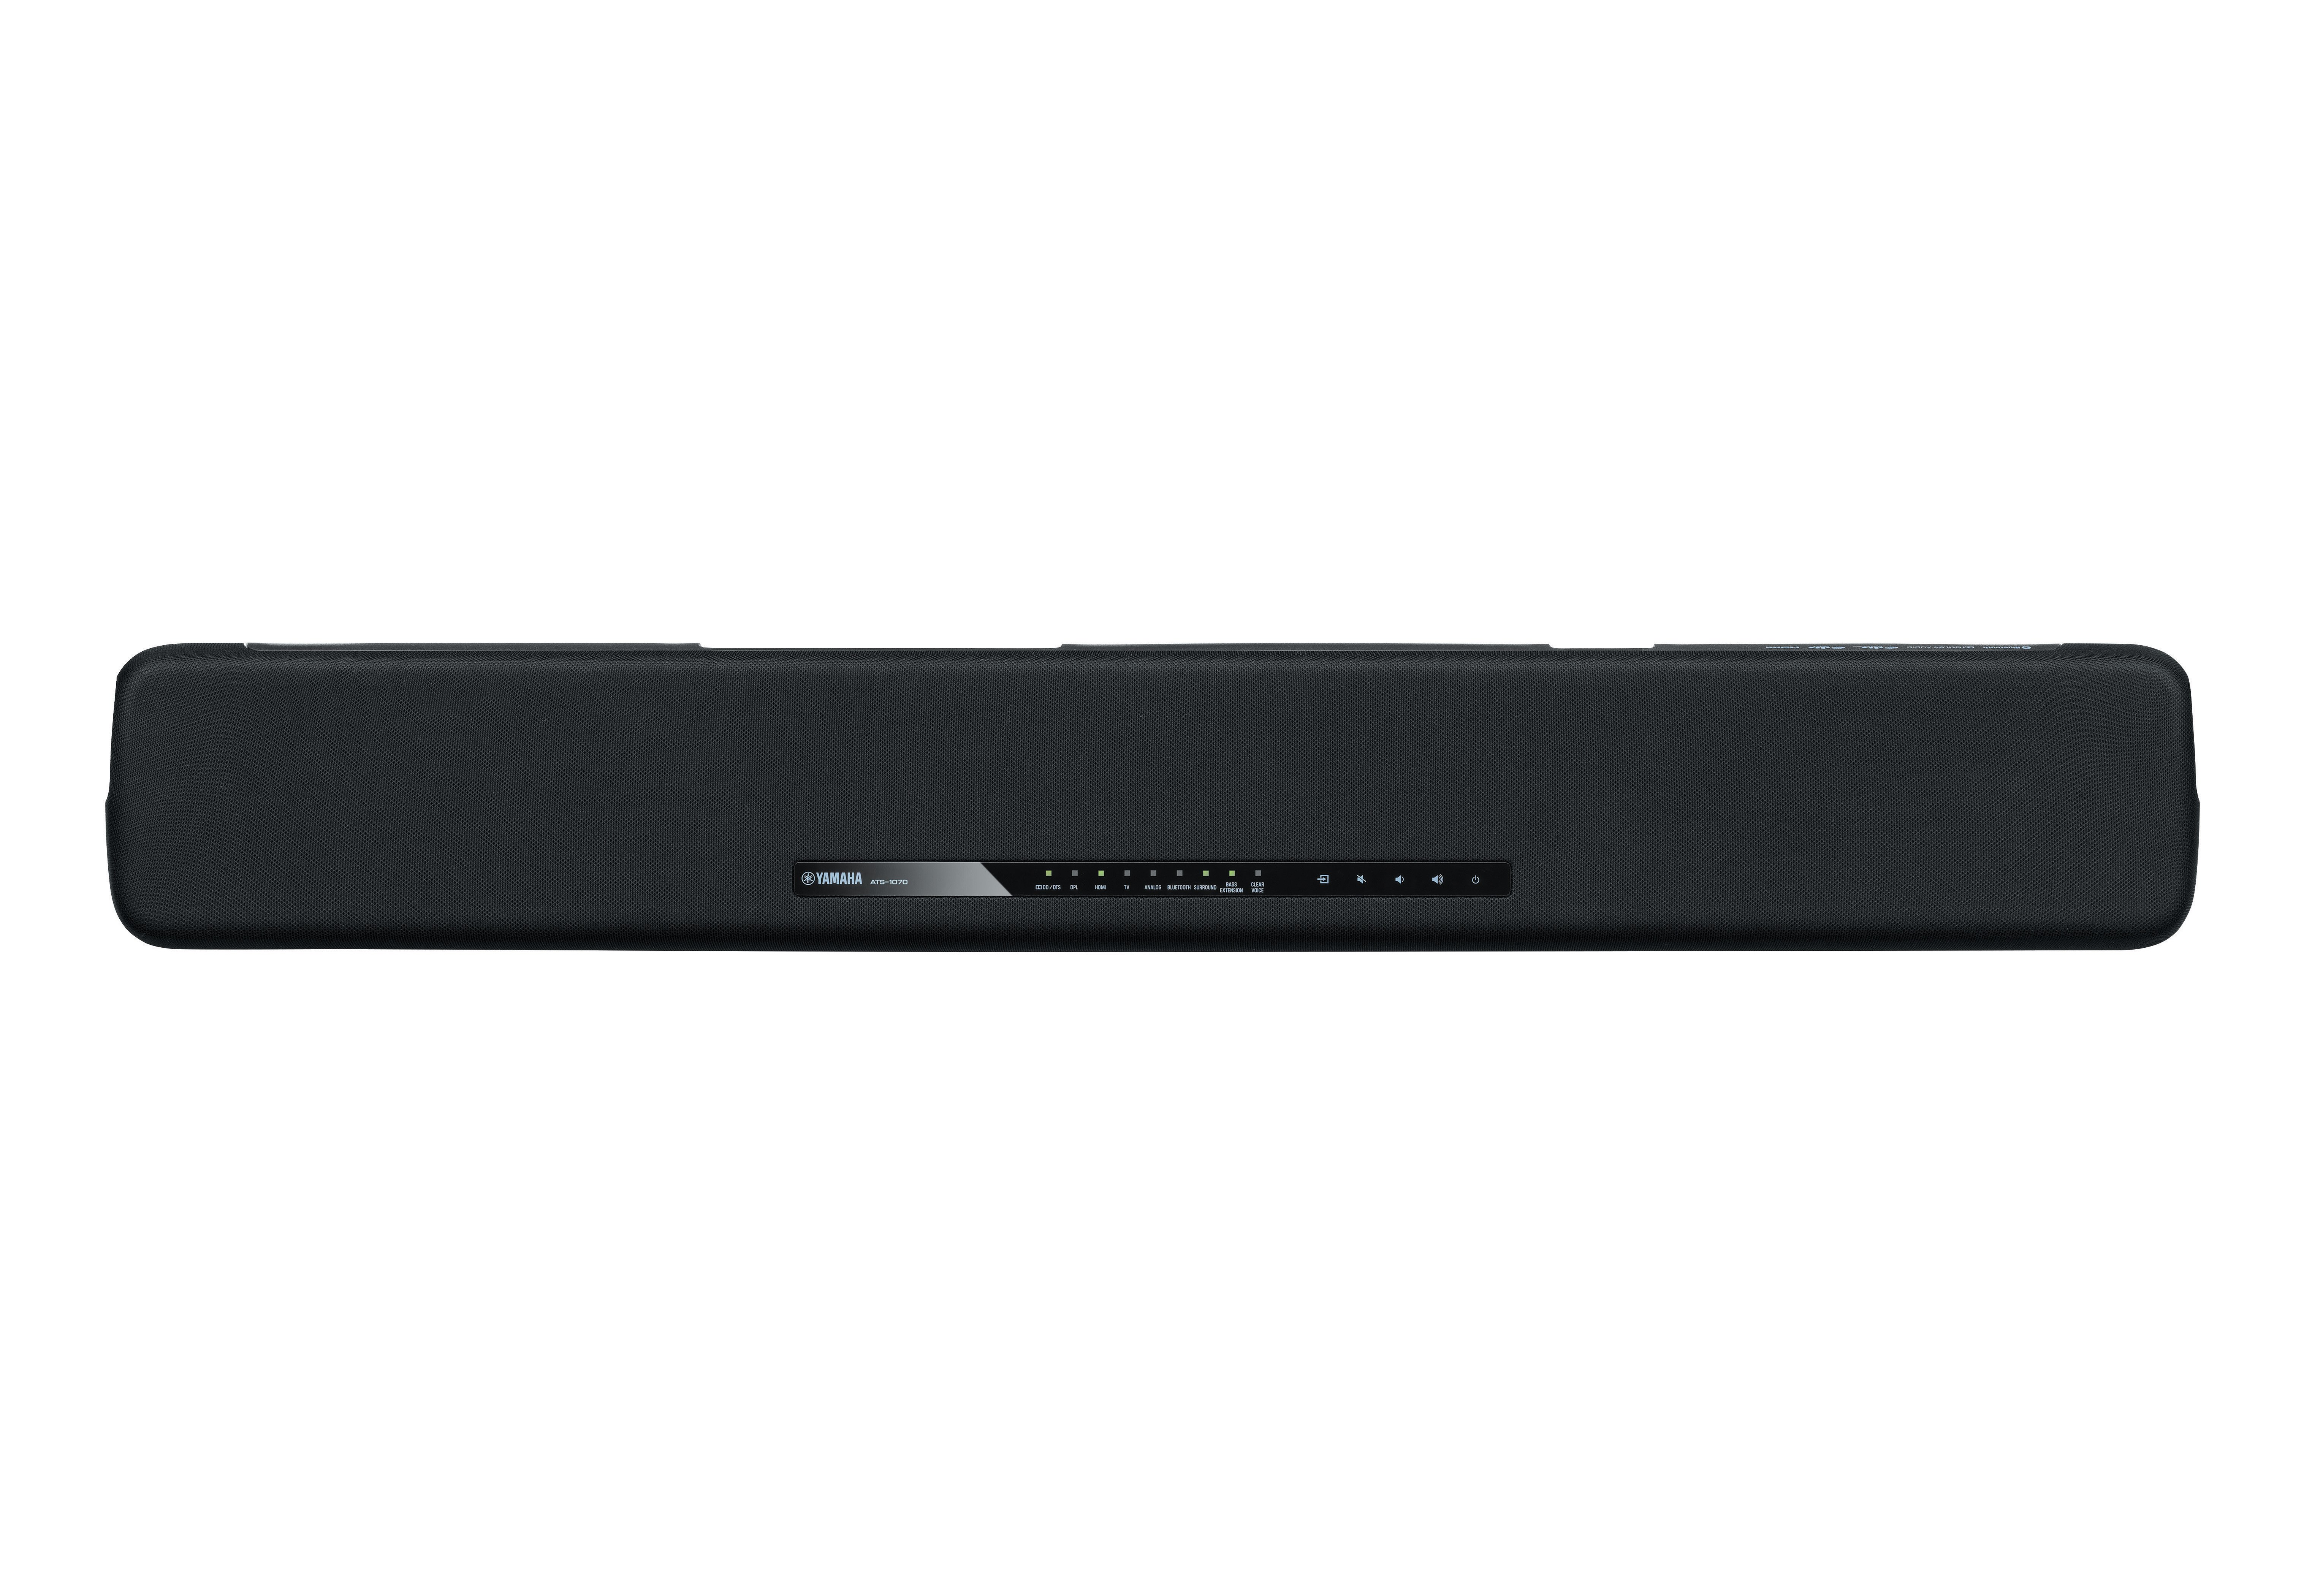 ATS-1070 - Overview - Sound Bars 